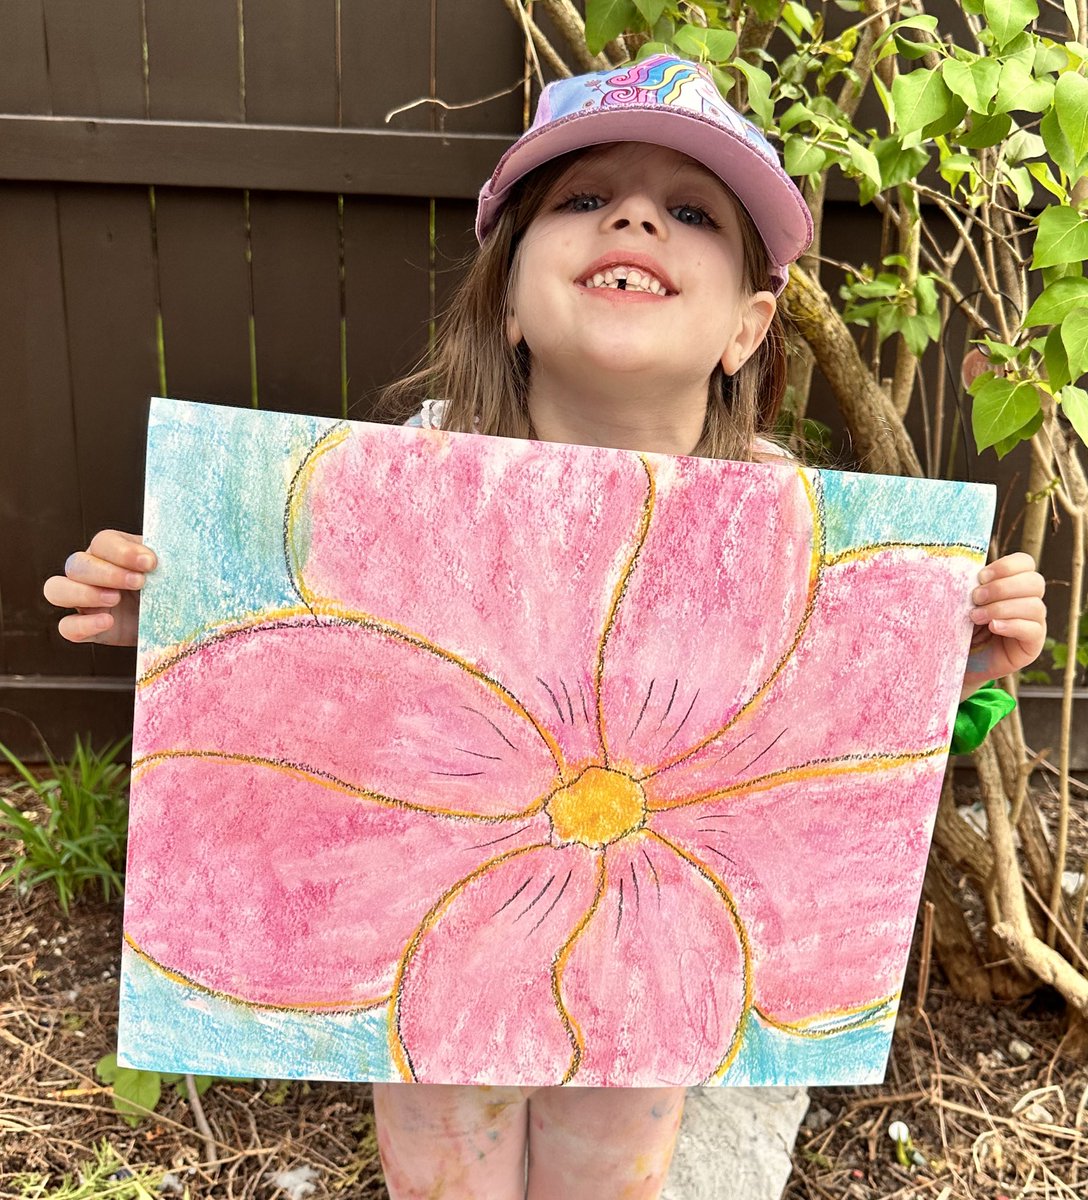 My Monday crew is back, and we kicked off the #SpringTerm with Georgia O'Keeffe’s GIANT flowers in chalk pastels. 🌼🌺🌸 #StudioWorkshops #ArtMatters #ArtEducation